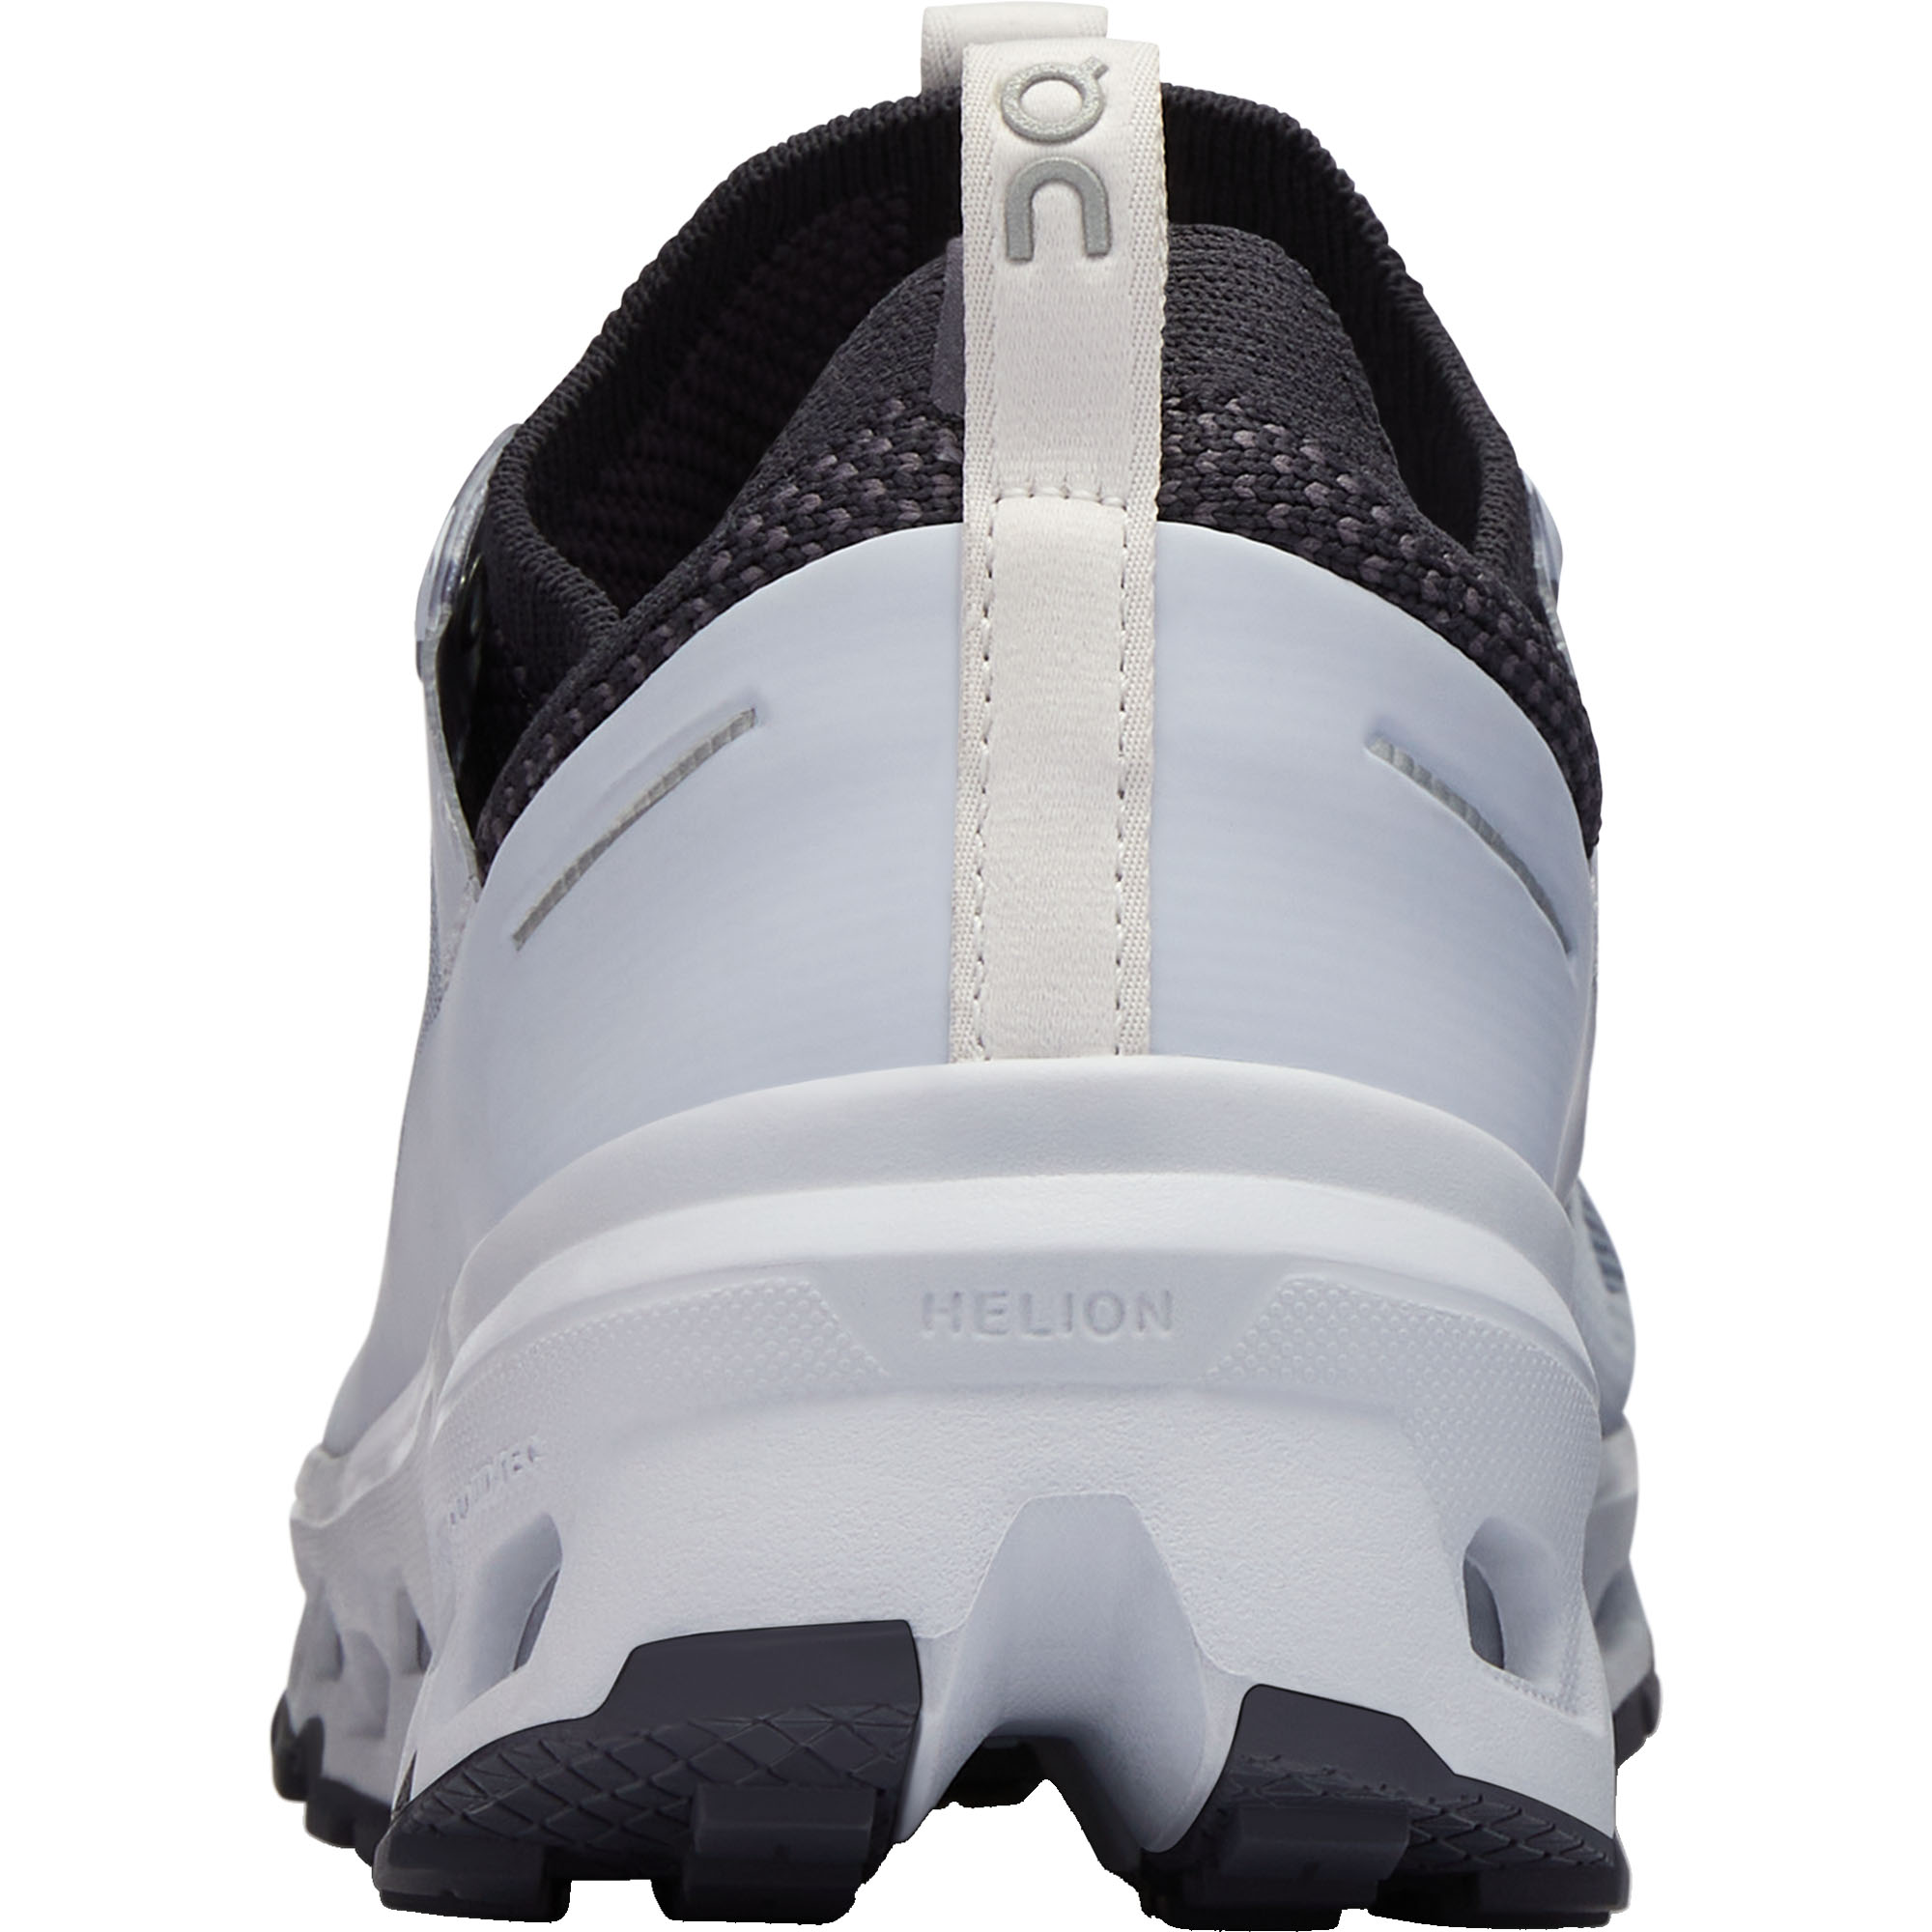 On Cloudultra 2 Women's Trail Running Shoes